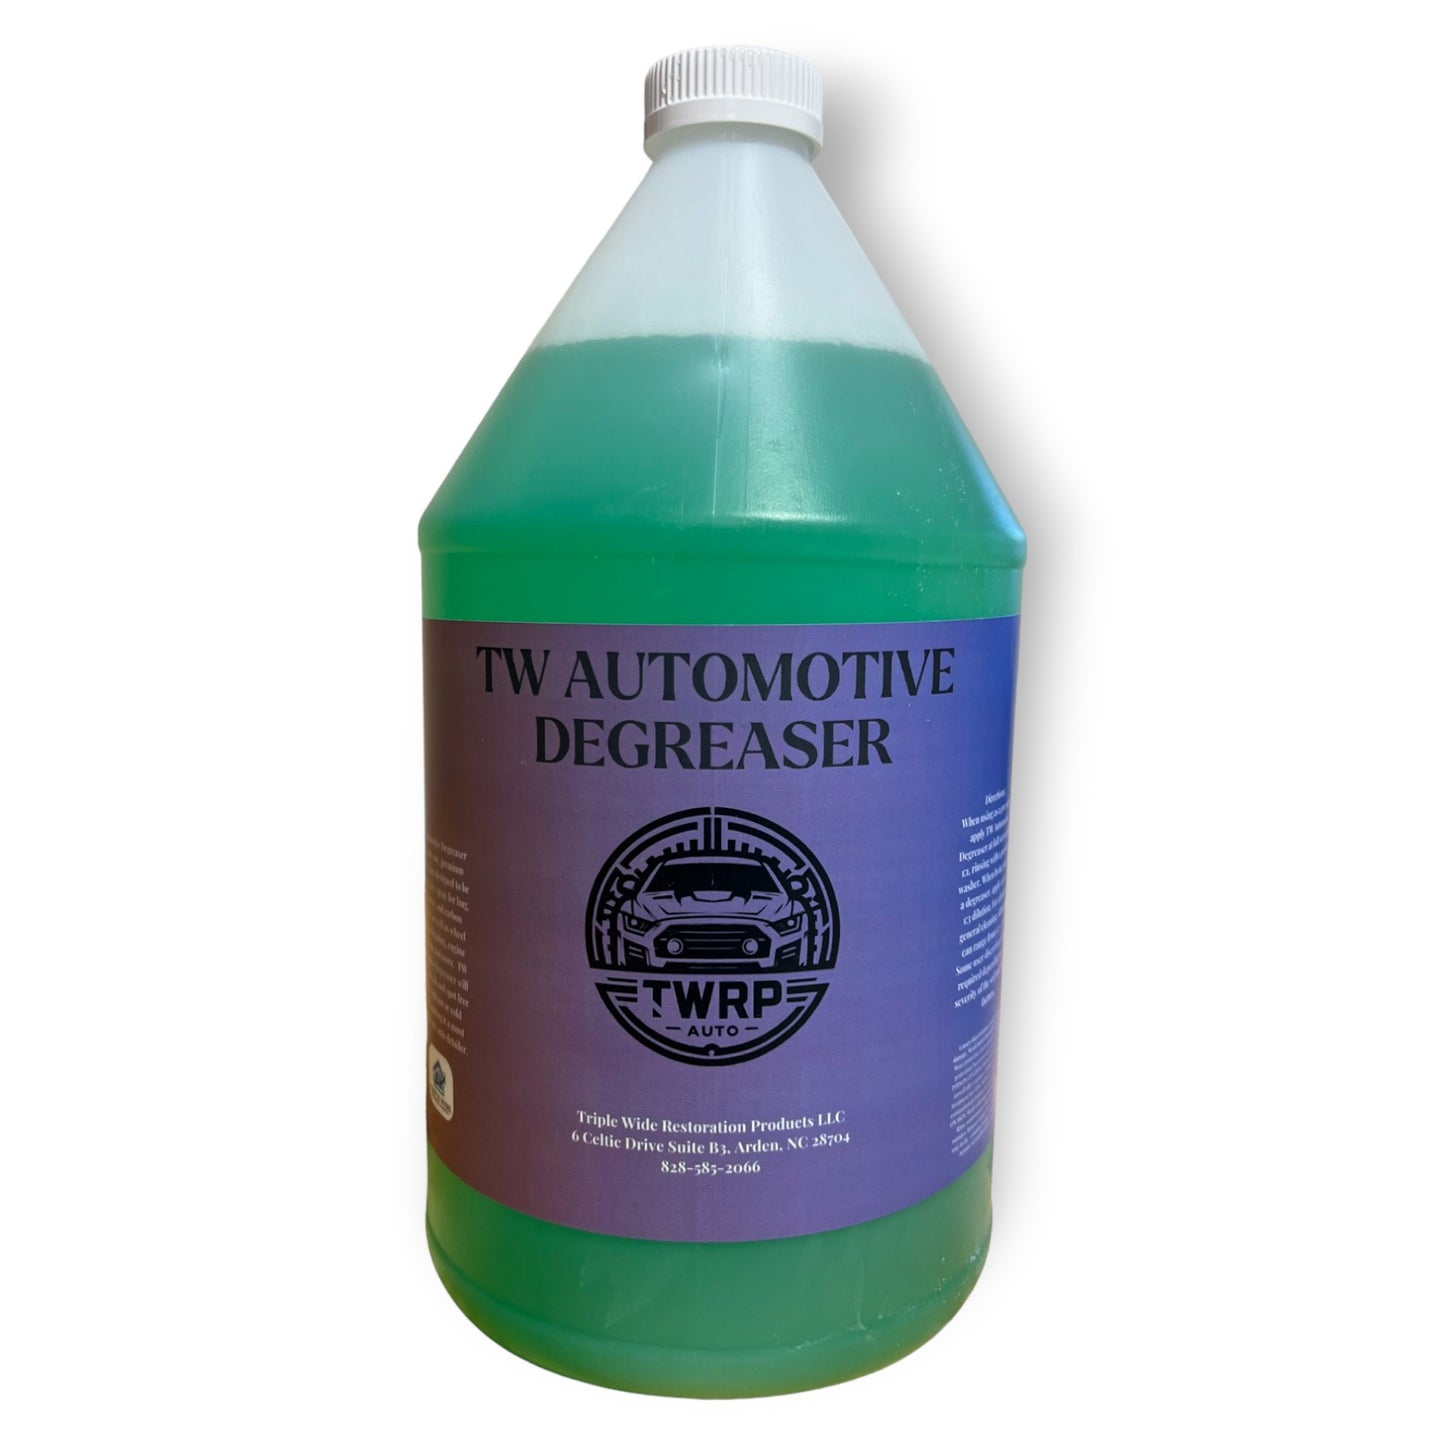 TW Automotive Degreaser - All Purpose Degreaser